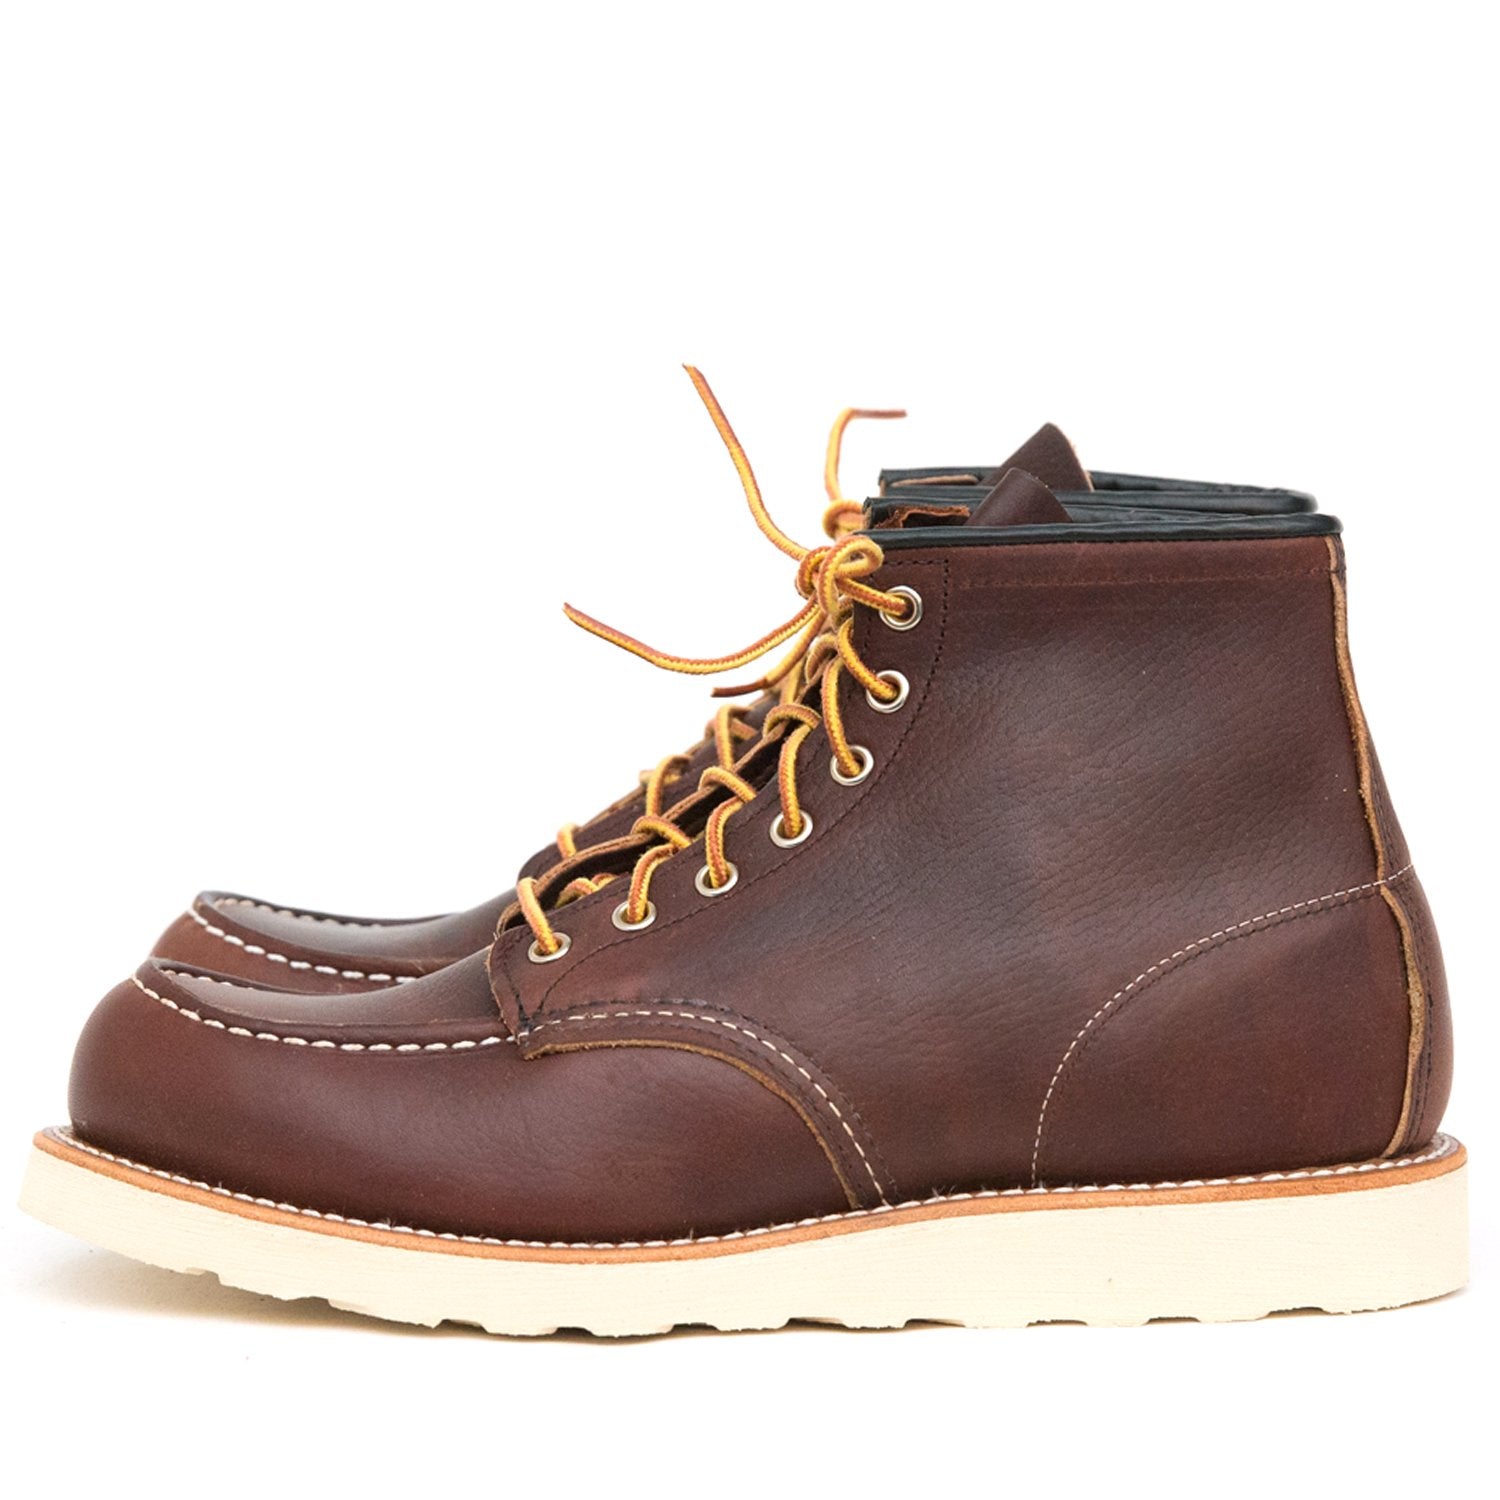 RED WING SHOES 8138 CLASSIC MOC BRIAR OIL SLICK